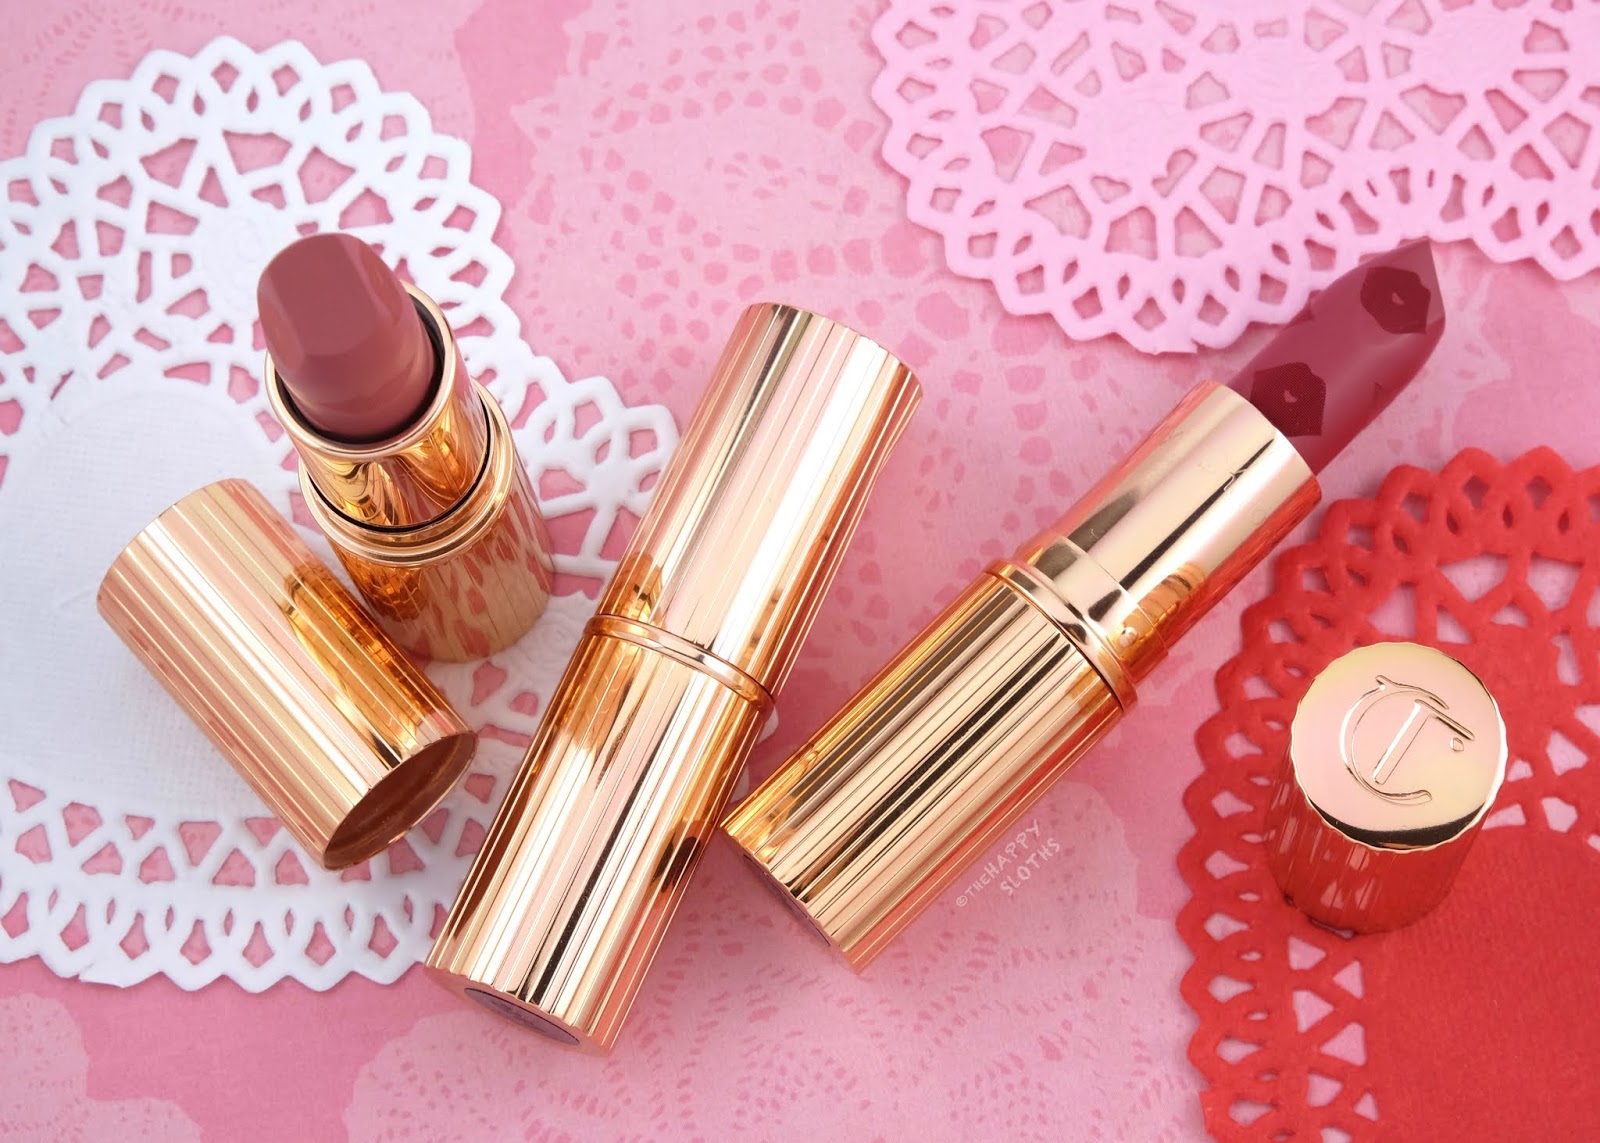 Charlotte Tilbury | *NEW* Love Filter Matte Revolution Lipsticks: Review and Swatches